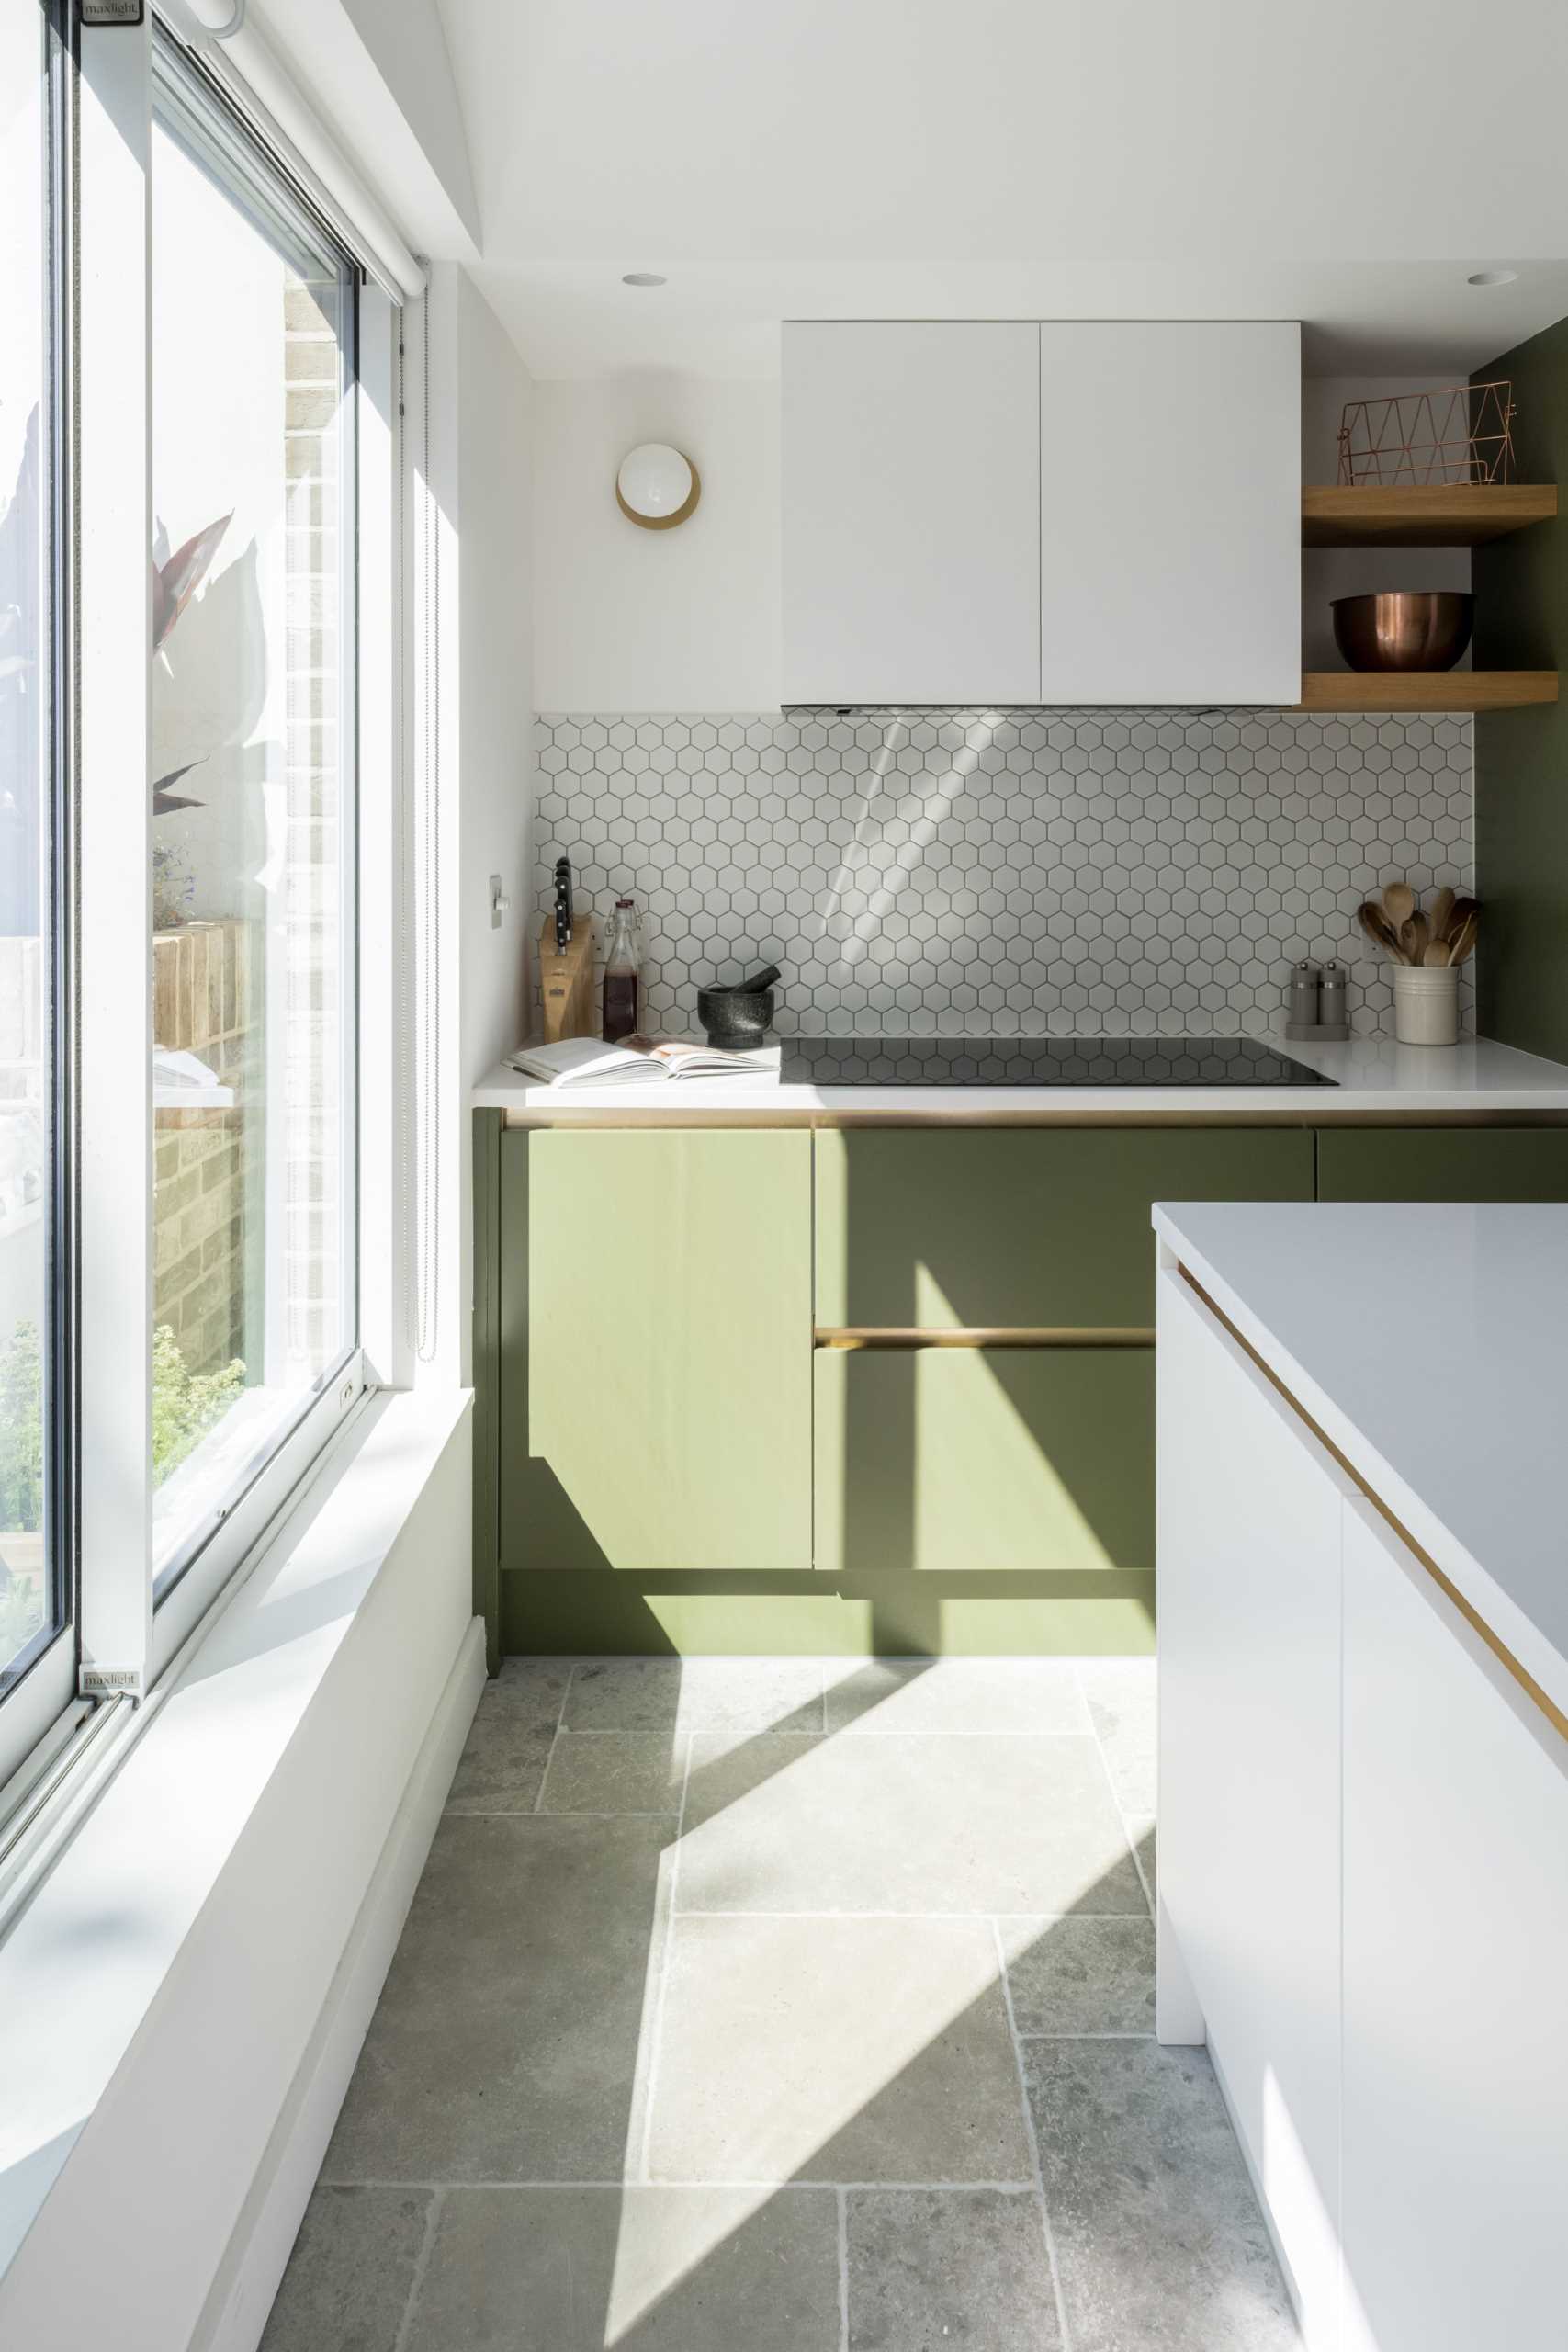 The new kitchen includes matte green and white cabinets, small hexagonal white tile backsplashes, wood shelves, and an island with undermount sink.